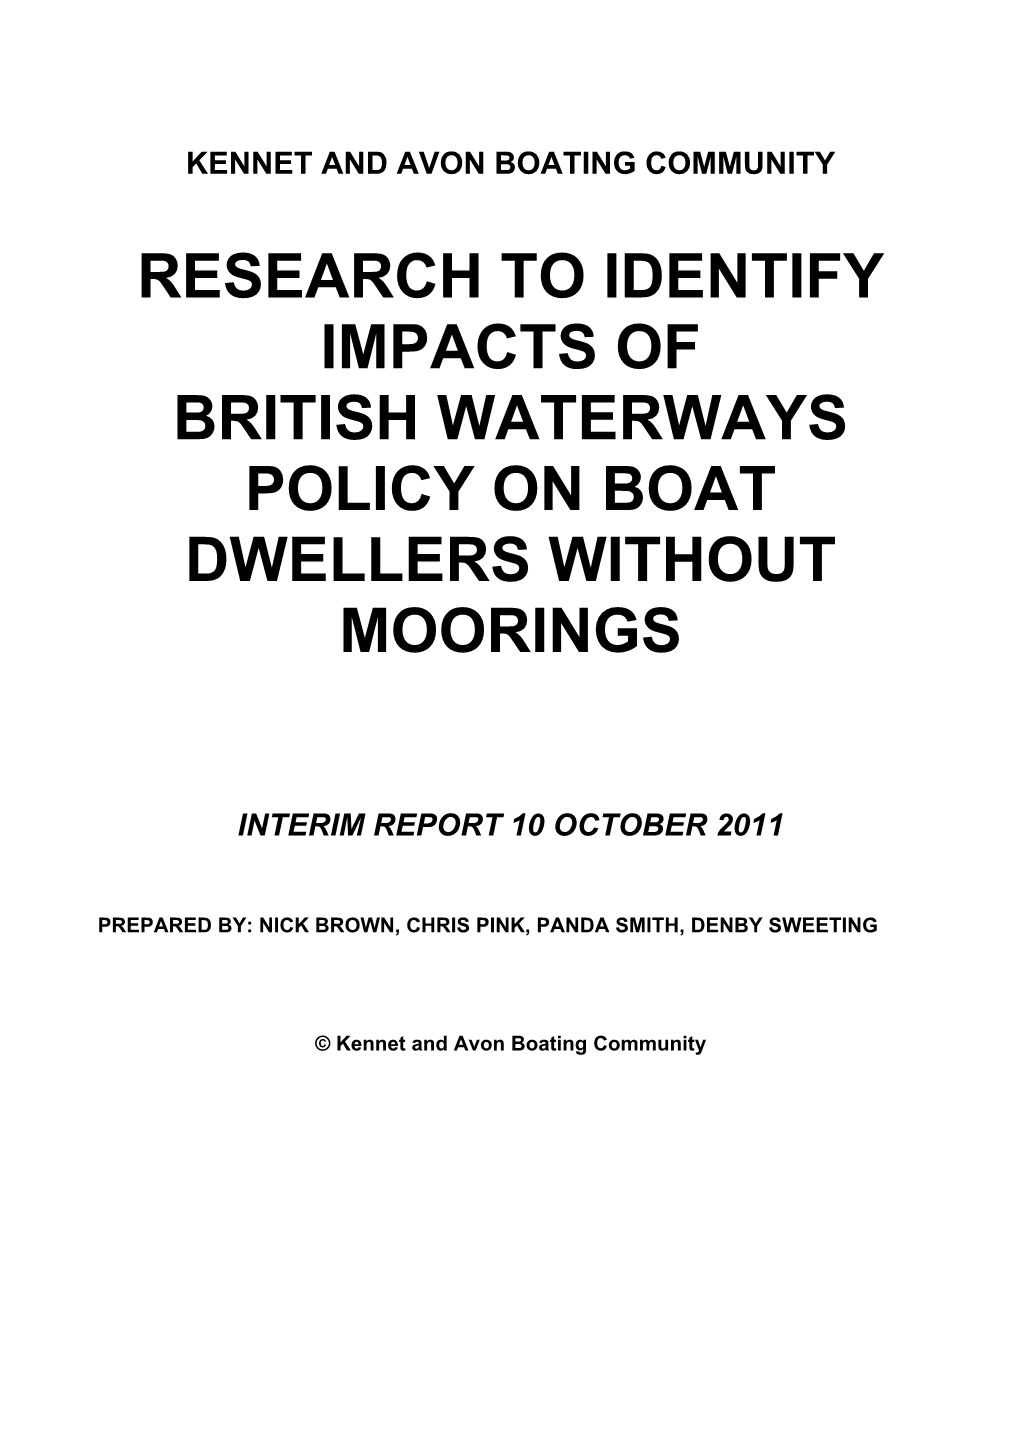 Research to Identify Impacts of British Waterways Policy on Boat Dwellers Without Moorings